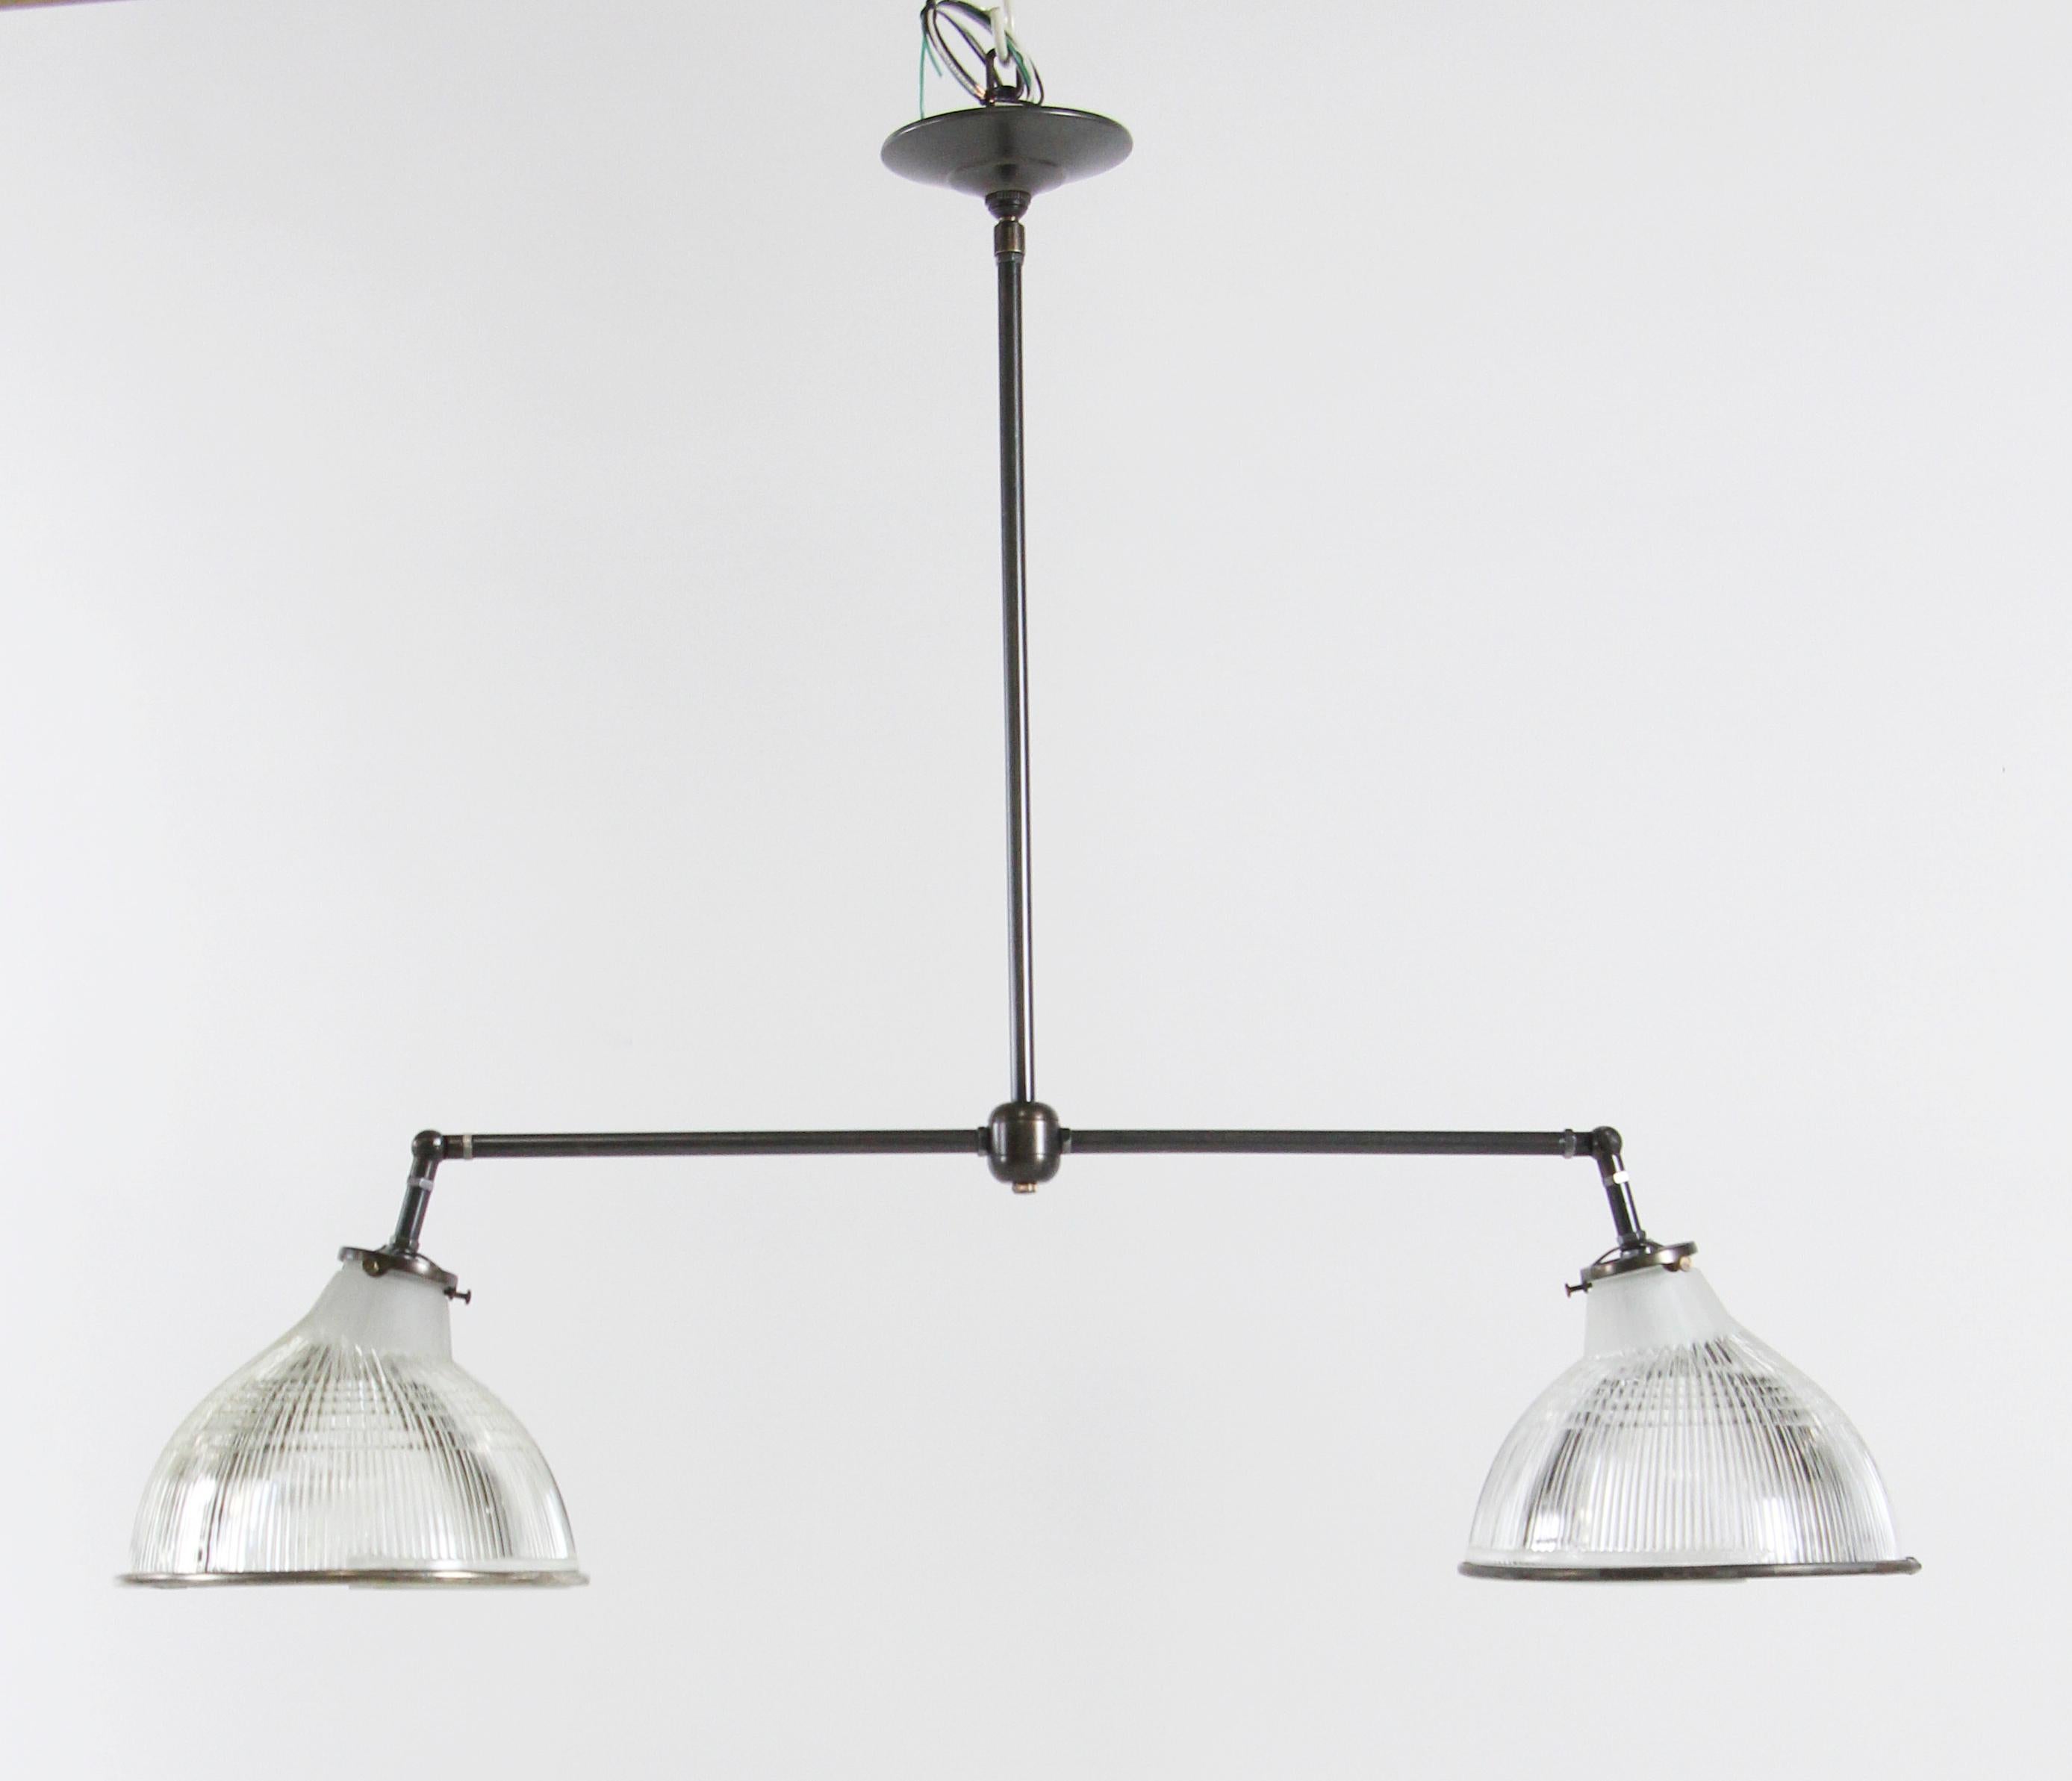 Modern bronze double light pendant with antique Holophane Industrial shades. The 'elbows' are adjustable so that the shades can be adjusted to any angle desired. Small quantity available at time of posting. Priced each.